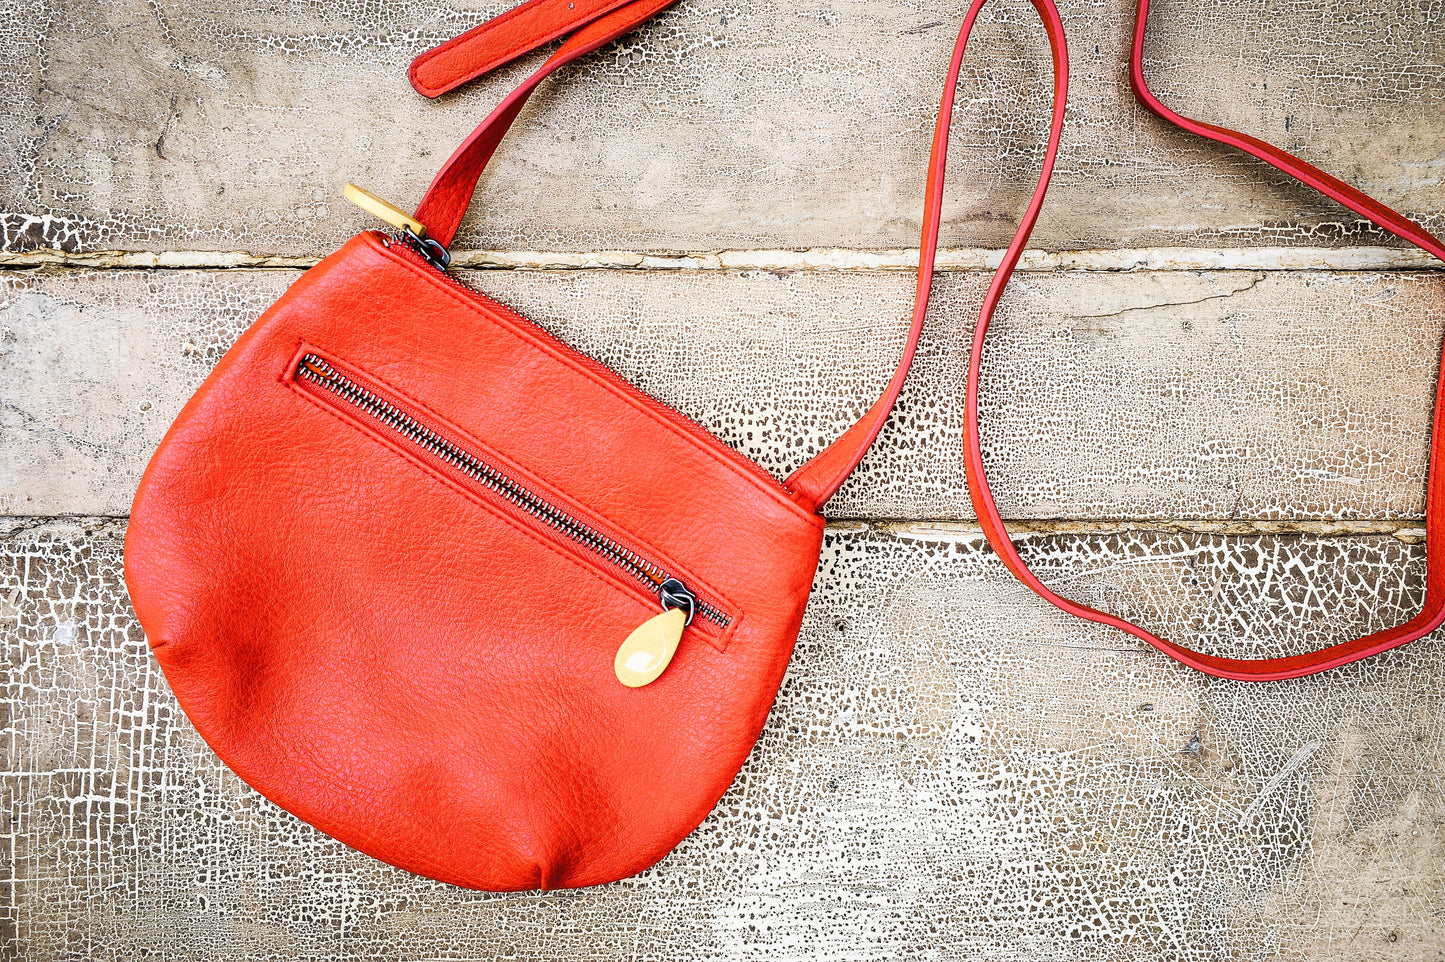 Willoughby Crossbody Bag in 5 Colors